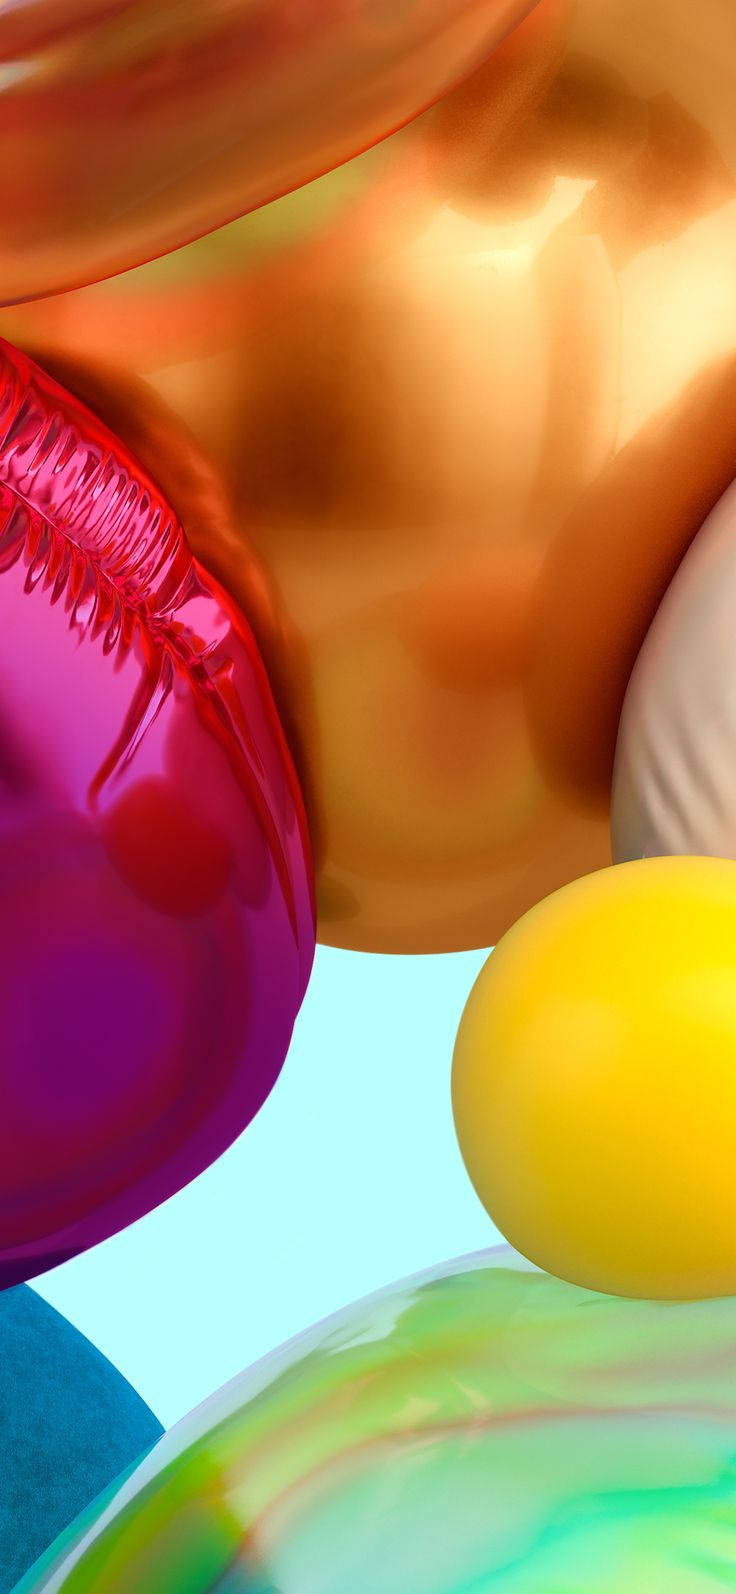 Samsung A71 Displaying A Captivating Wallpaper Of Multicolored Balloons Background